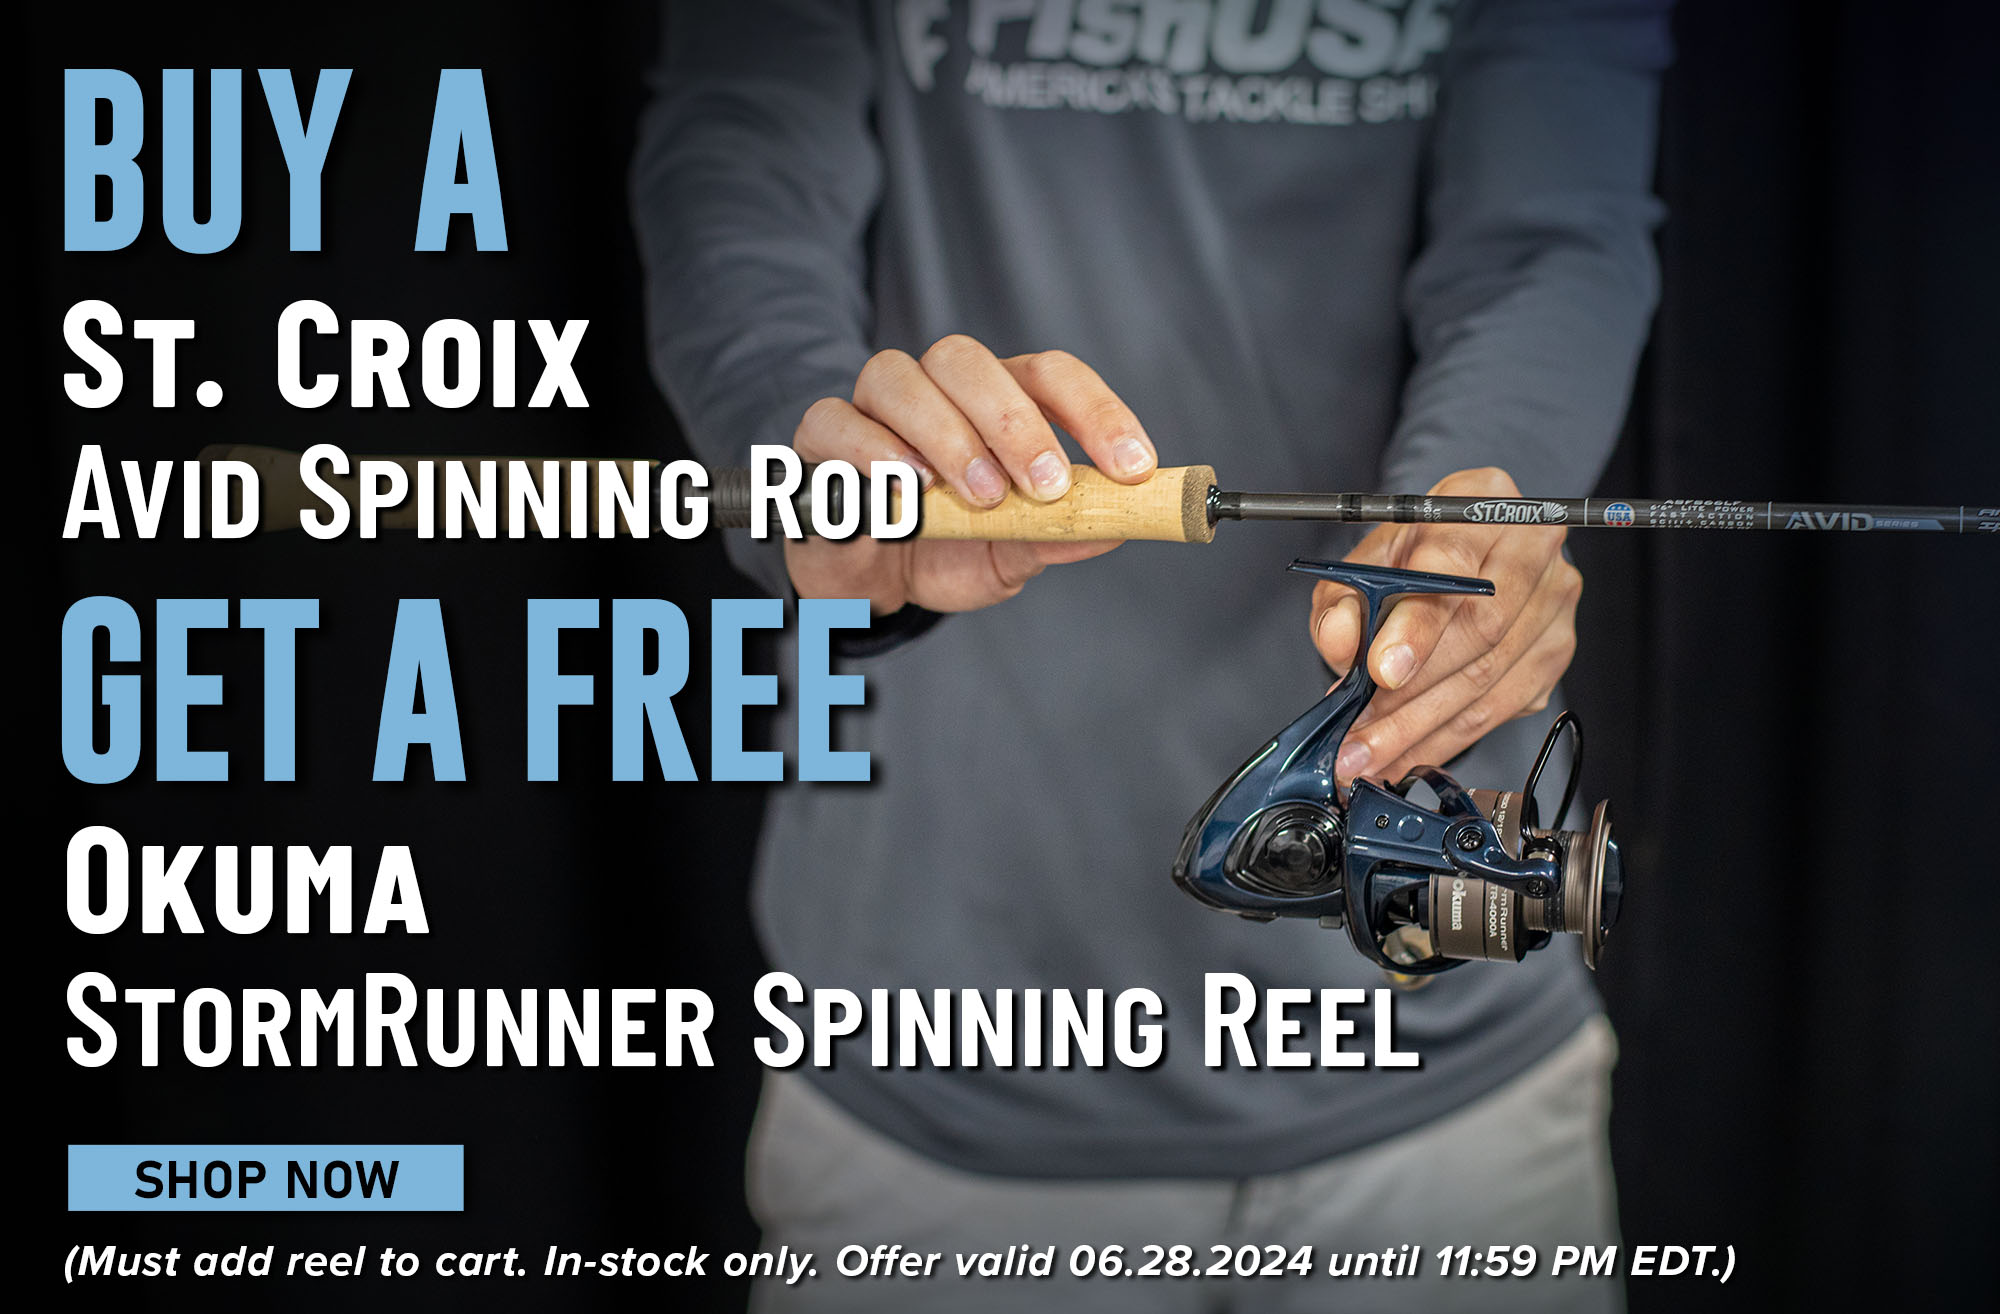 Buy a St. Croix Avid Spinning Rod Get a Free Okuma StormRunner Spinning Reel Shop Now (Must add reel to cart. In-stock only. Offer valid 06.28.2024 until 11:59 PM EDT.)